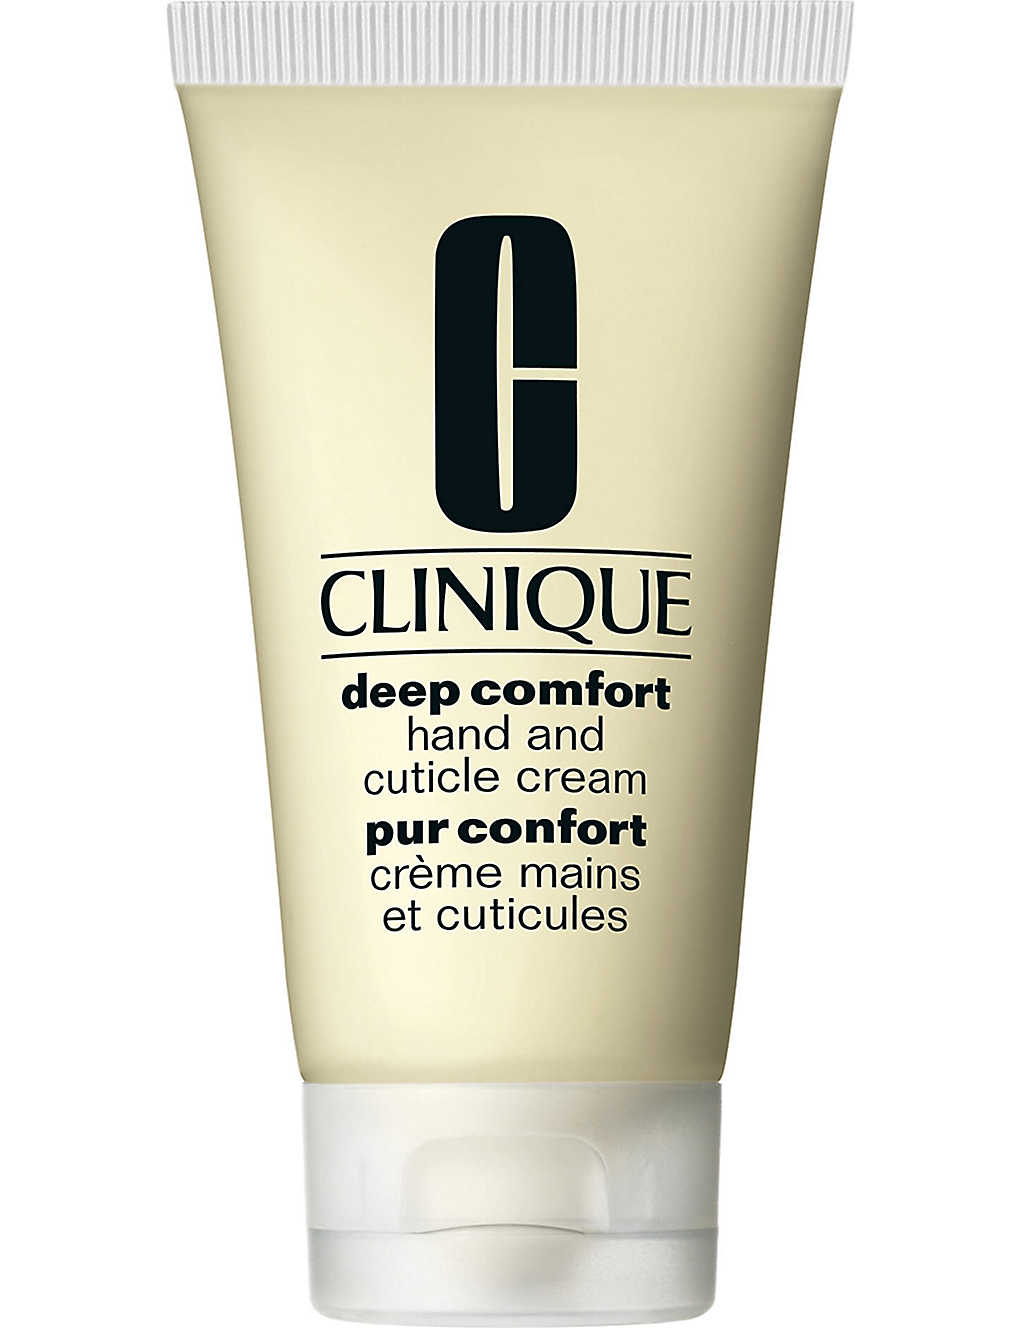 CLINIQUE DEEP COMFORT HAND AND CUTICLE CREAM 75ML,76266904